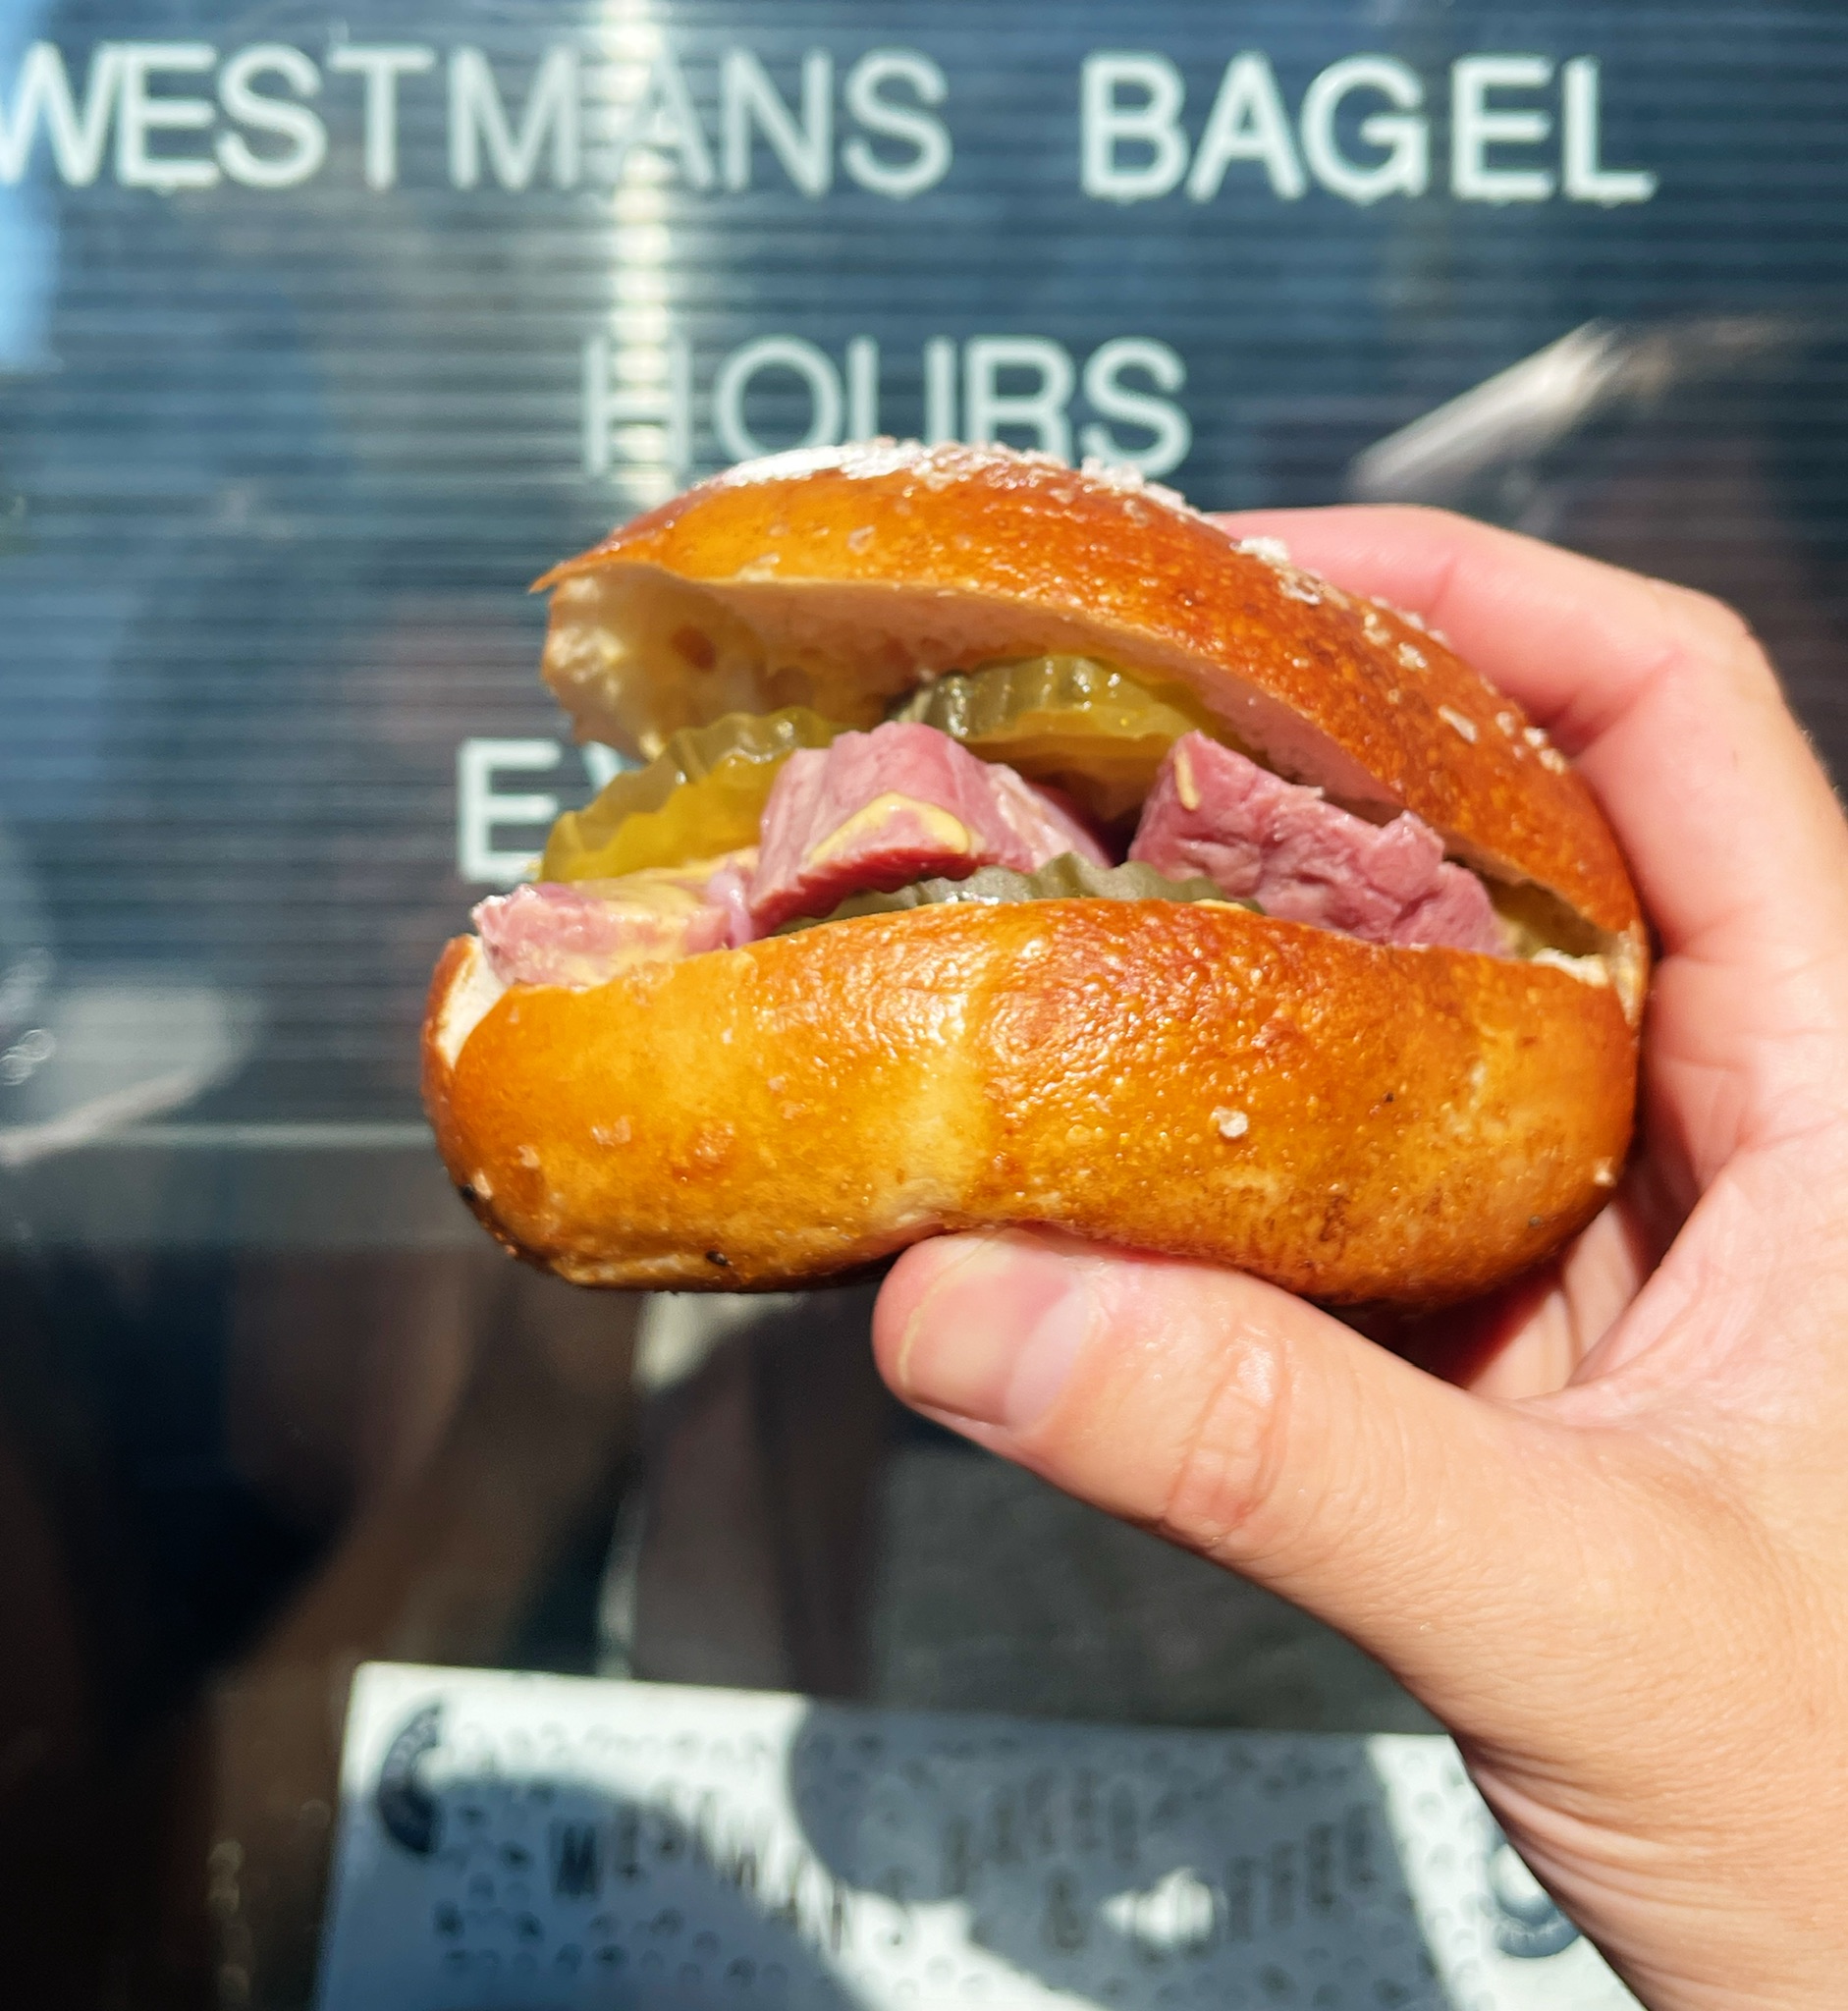 A bagel sandwich, held up by a hand, filled with pickles and corned beef.